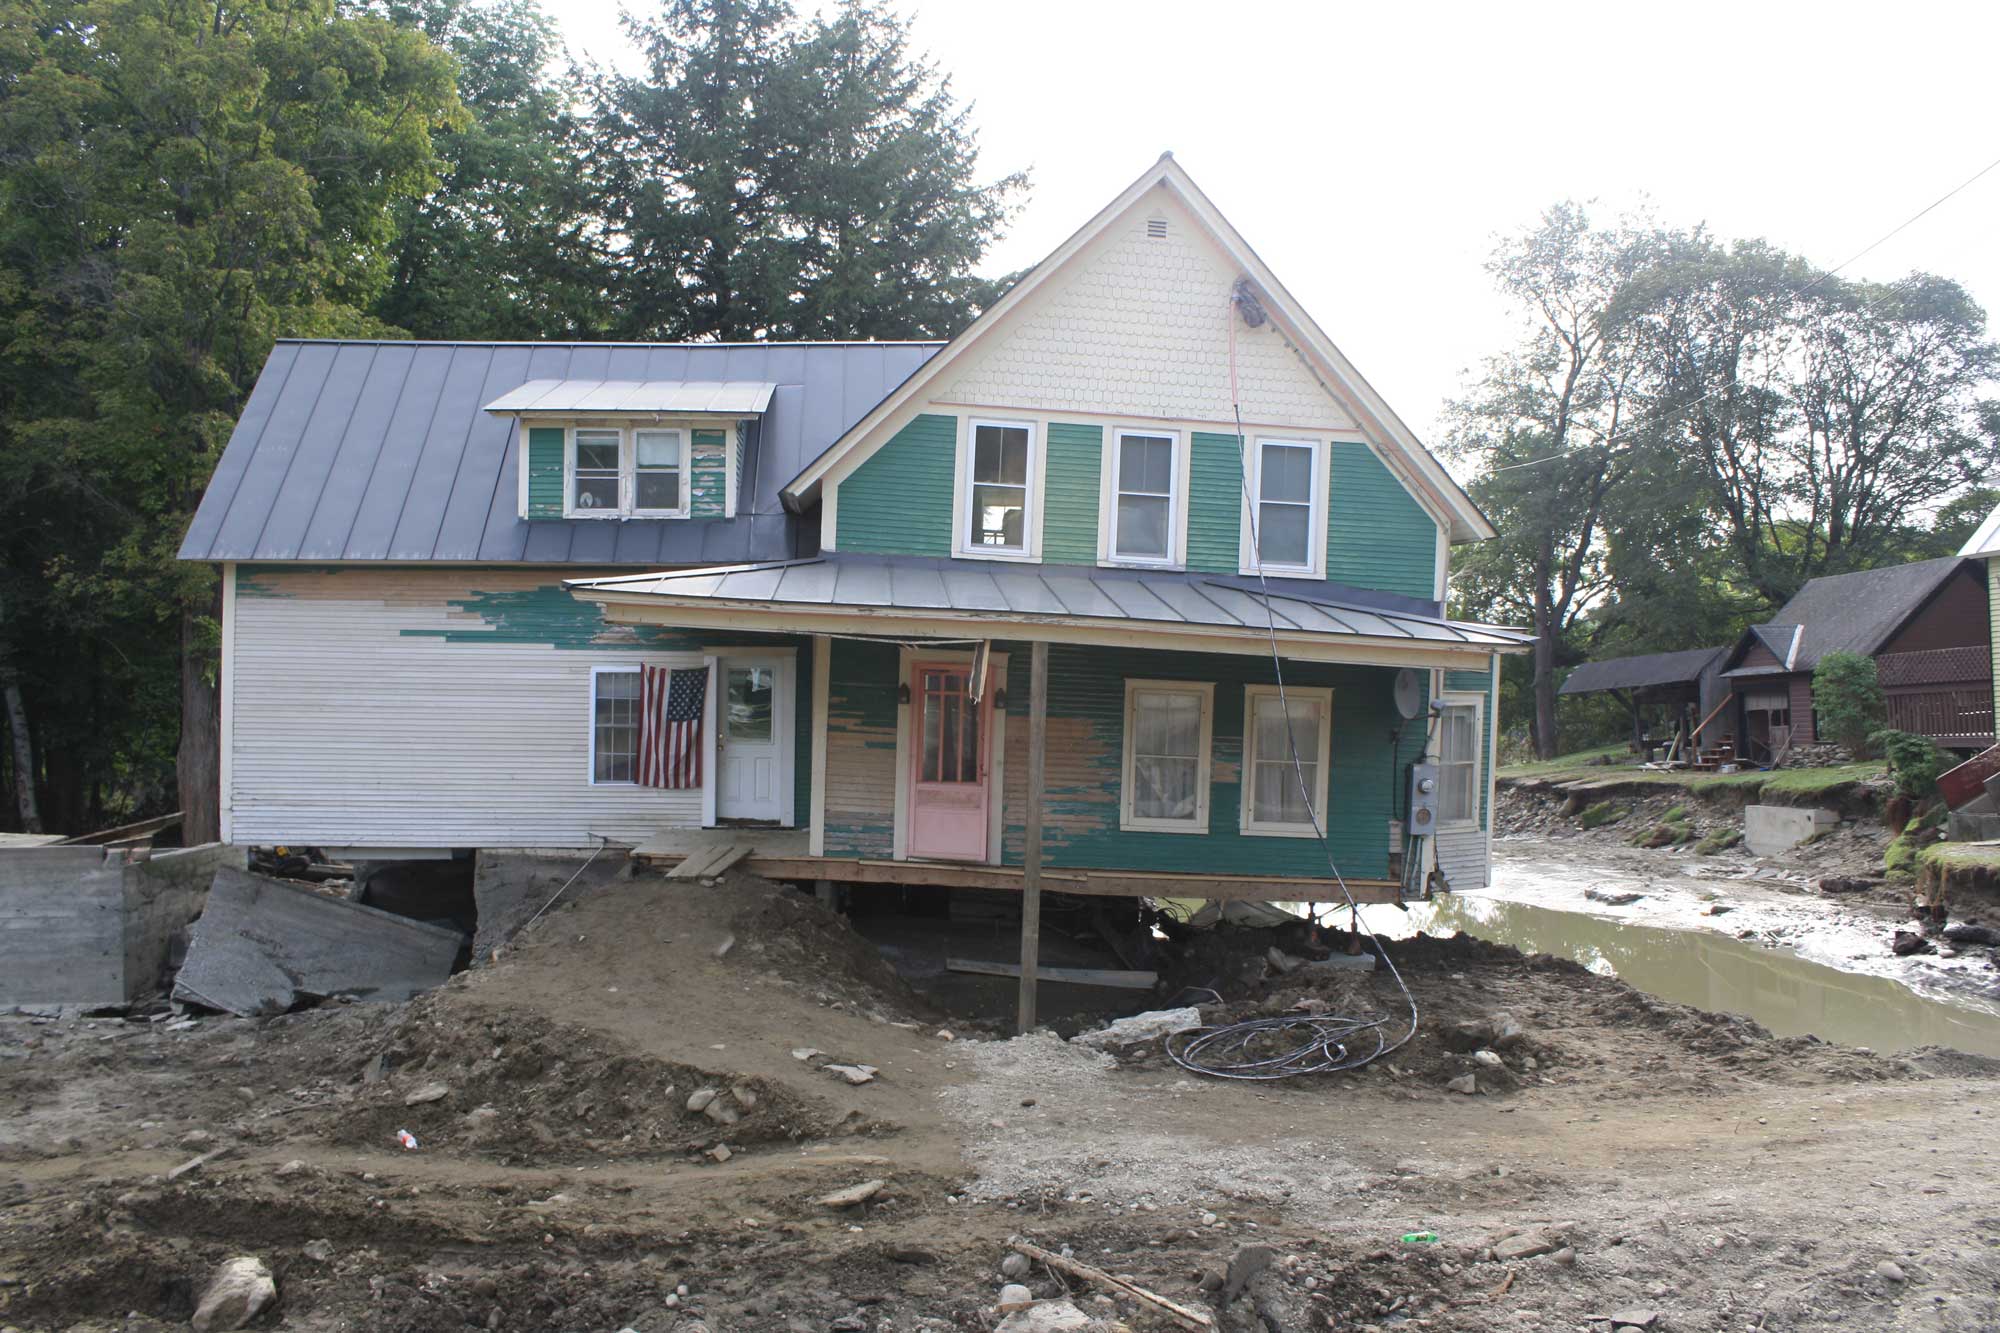 Photograph of flood damage in the town of Bethel, Vermont. The photo shows and white and green house from which much of the ground underneath was washed away. Other erosion to the landscape can be seen in the background.